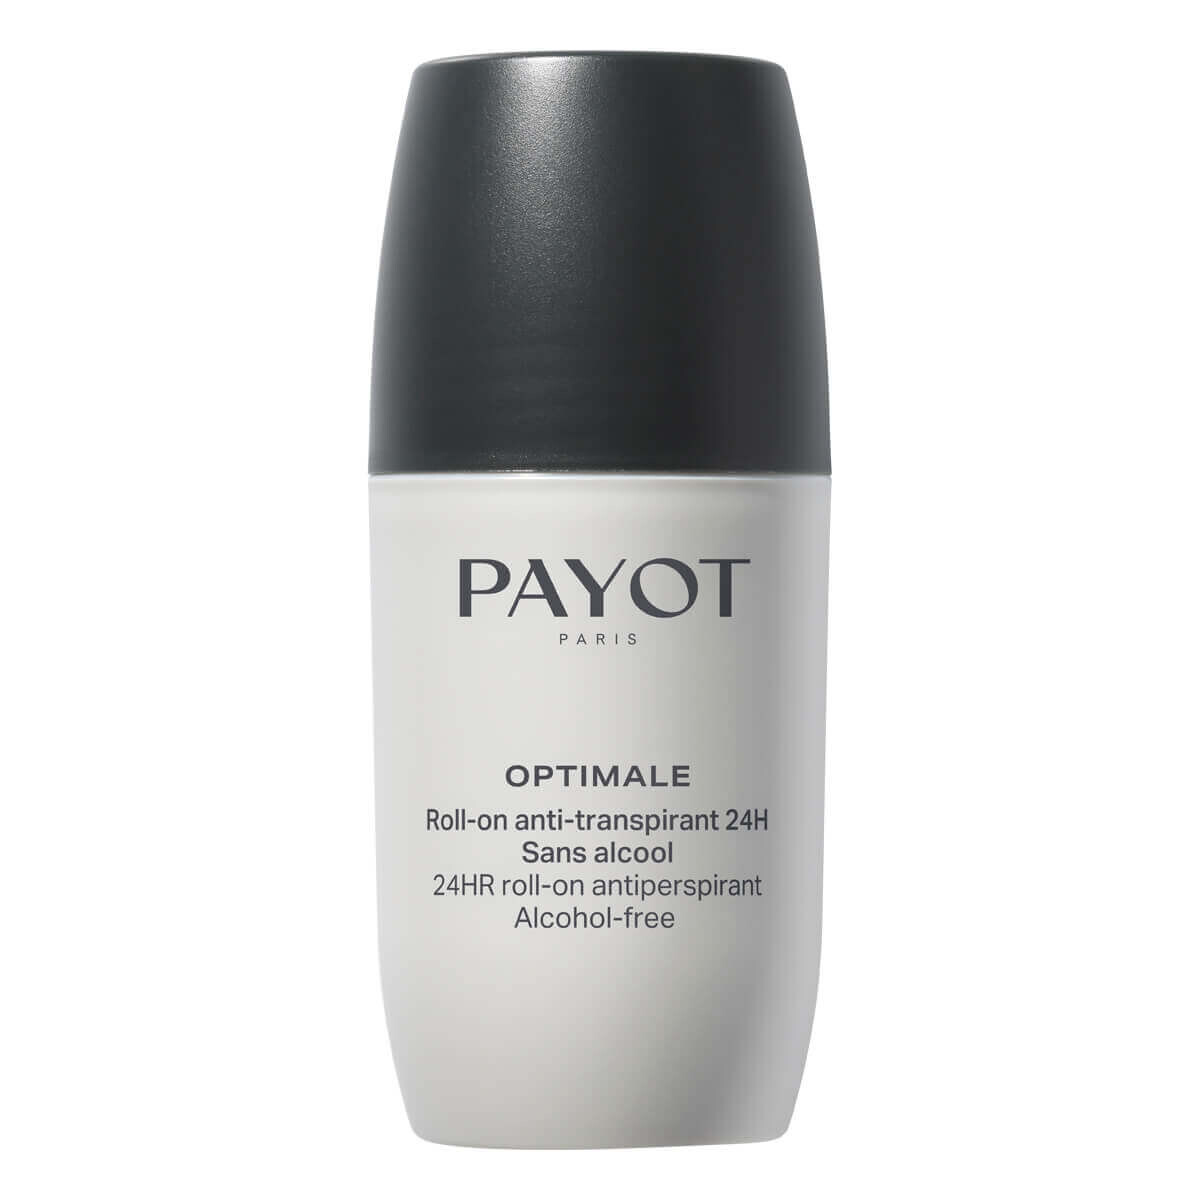 Billede af Payot Optimale 24hr Anti-perspirant Roll-On Deodorant, Alcohol free, 75 ml.